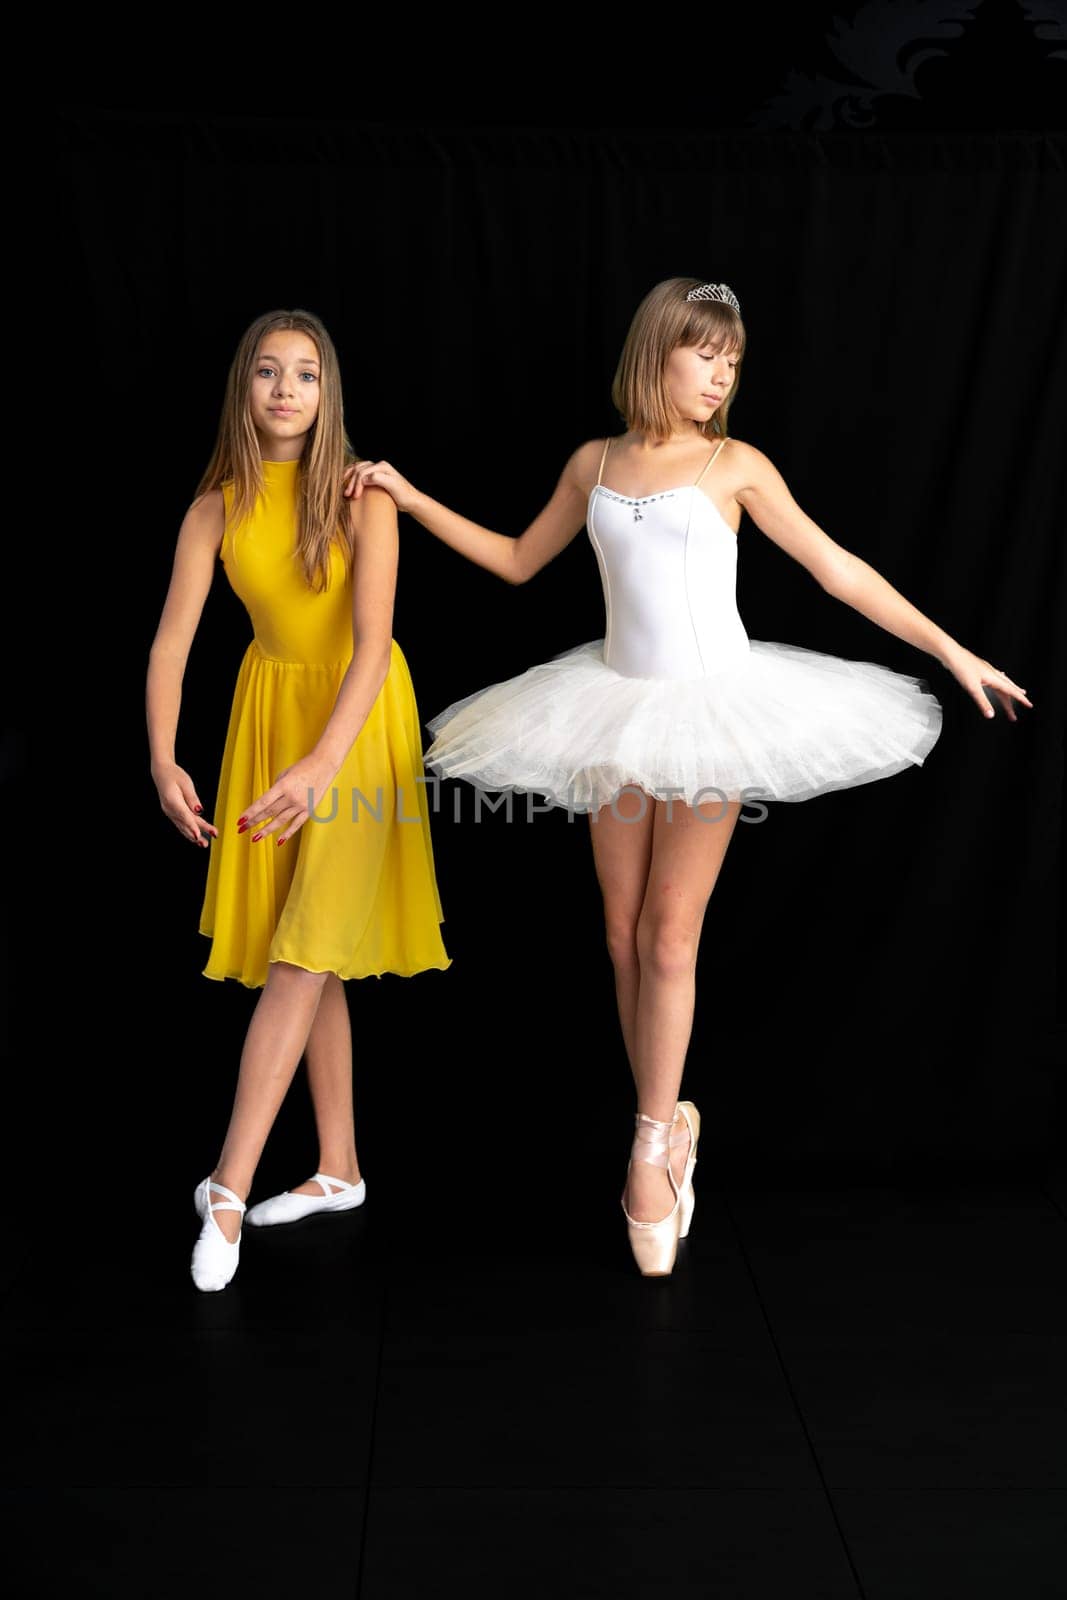 teenage ballerinas in the studio, portrait on a black background. High quality photo